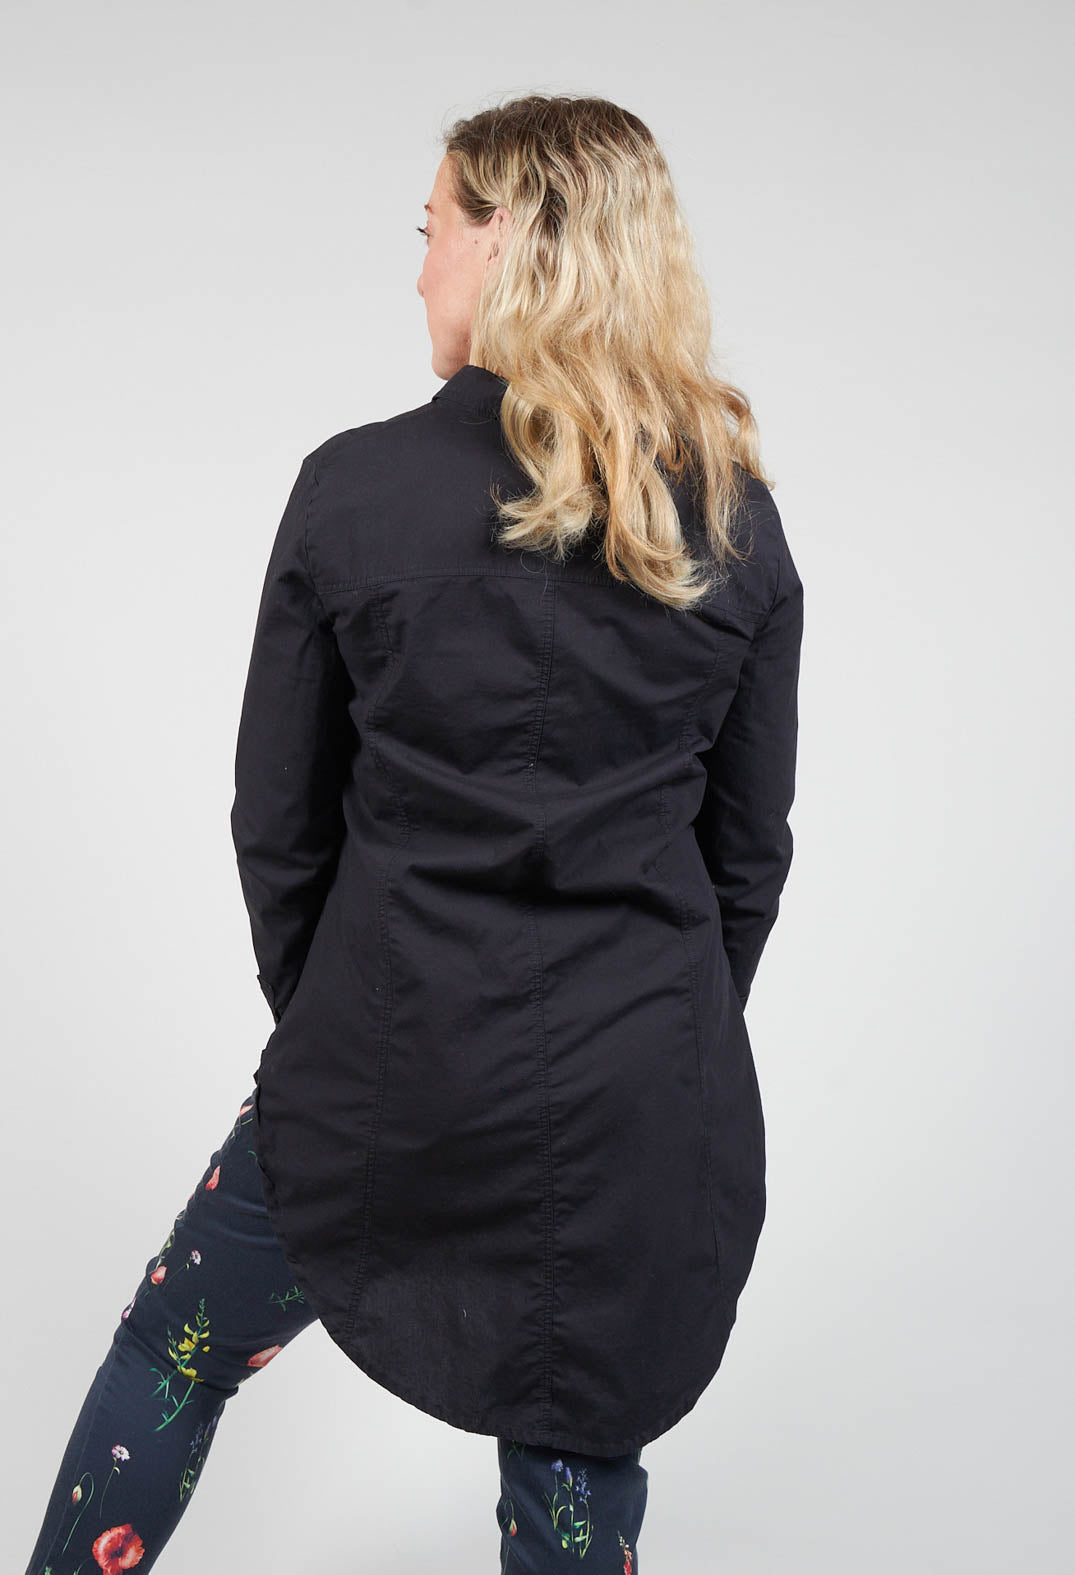 Long Sleeved Shirt with Subtle Print in Black